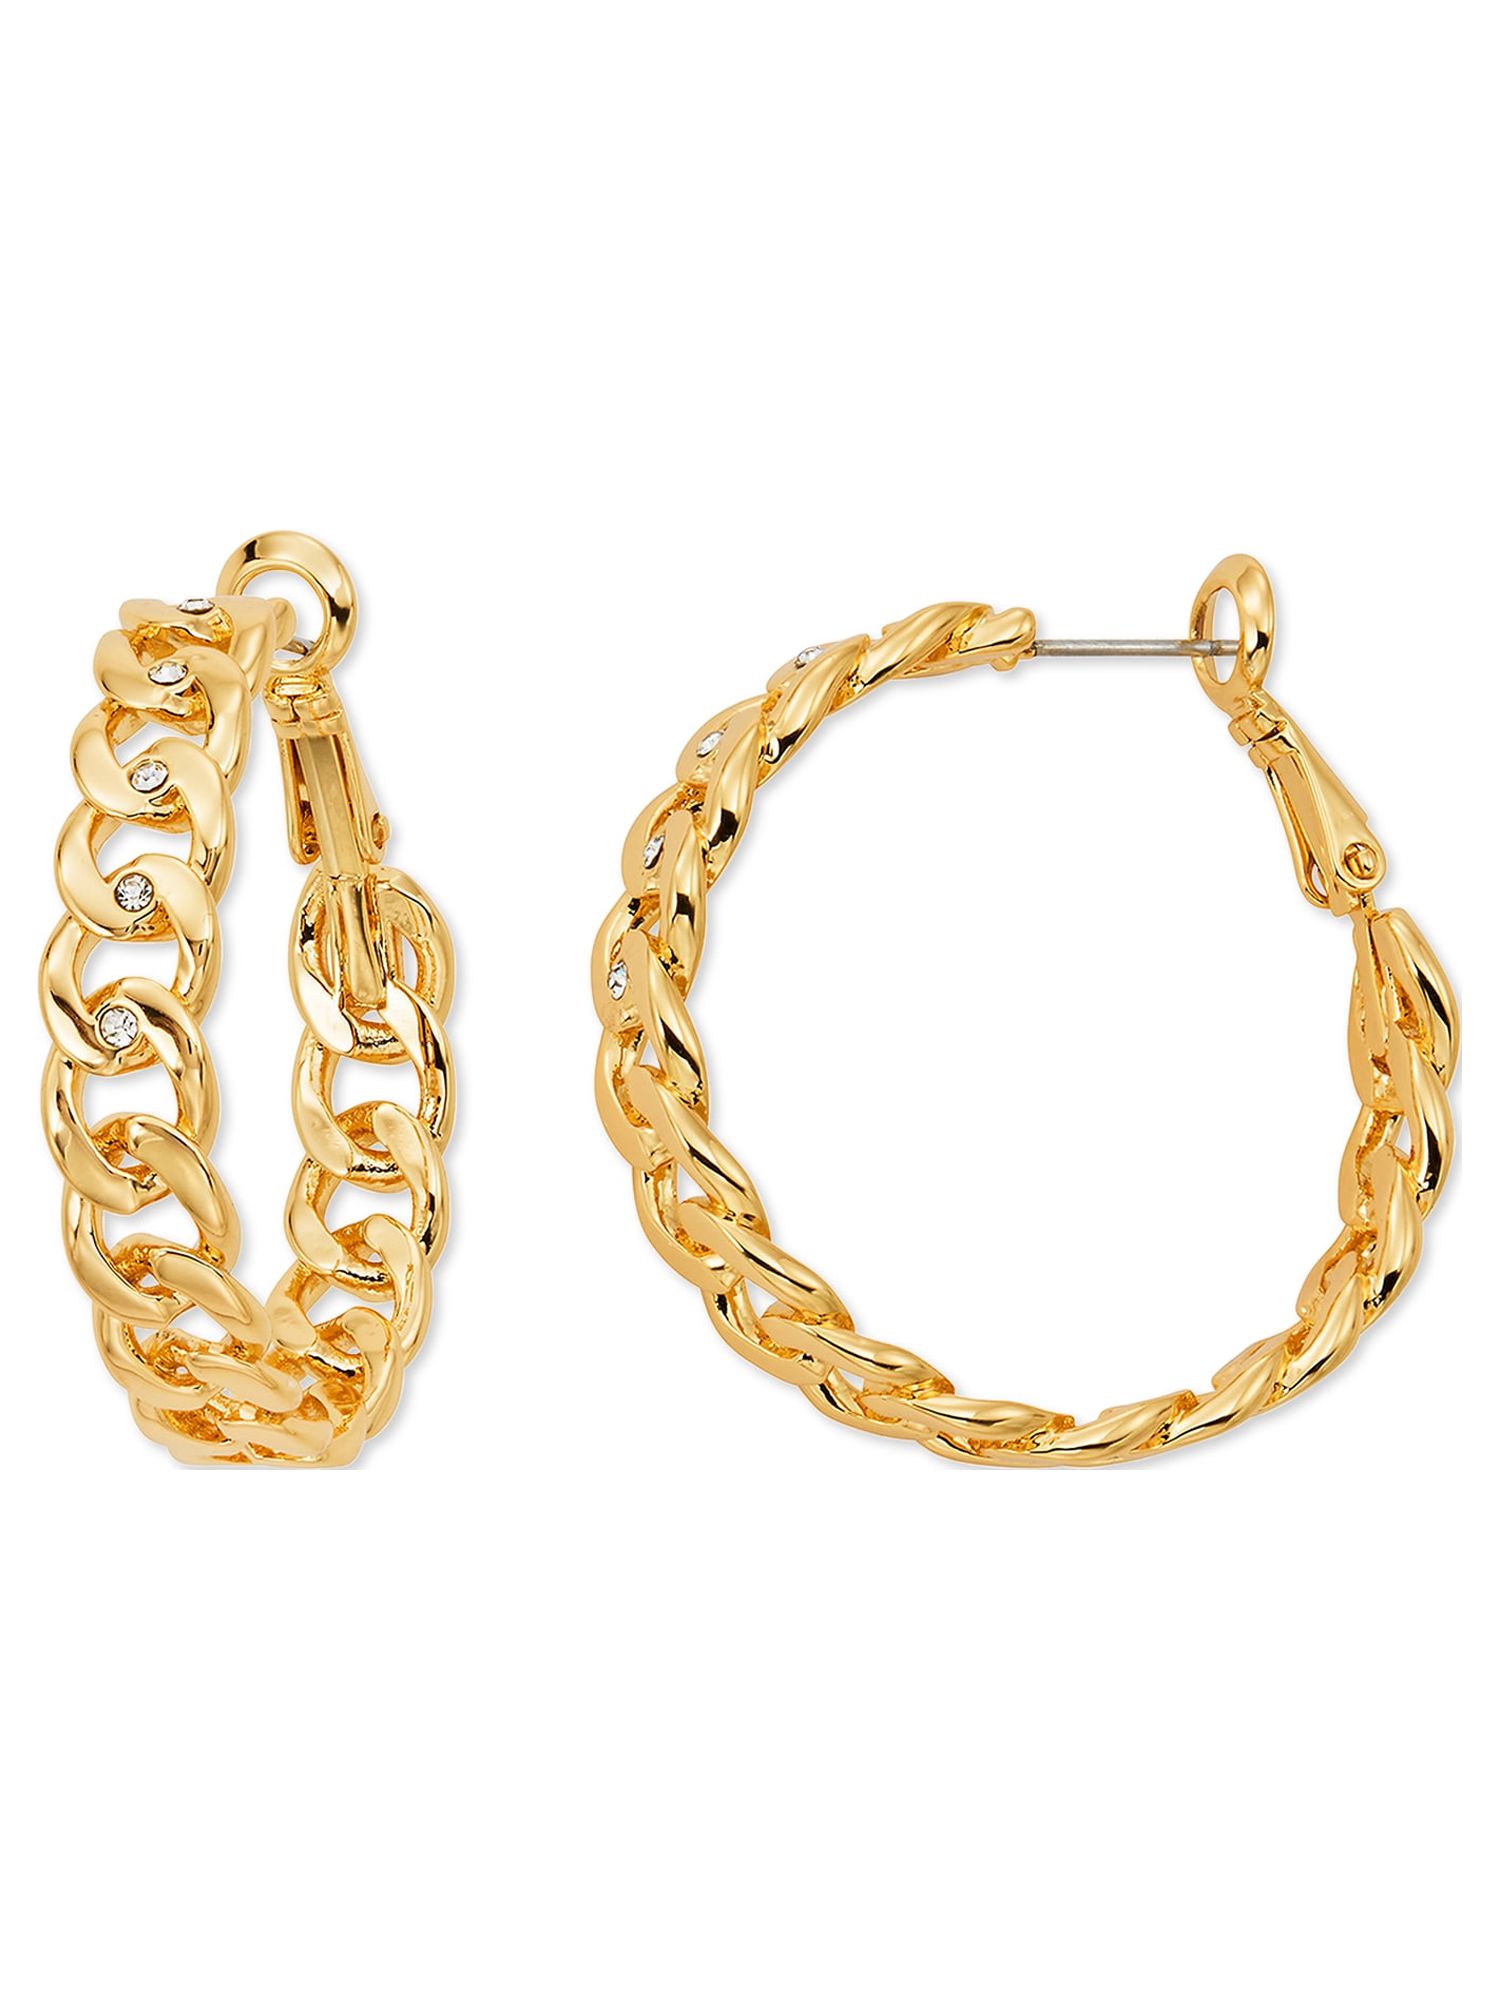 Scoop Brass Yellow Gold-Plated Chain Link Hoop Earrings - image 1 of 3